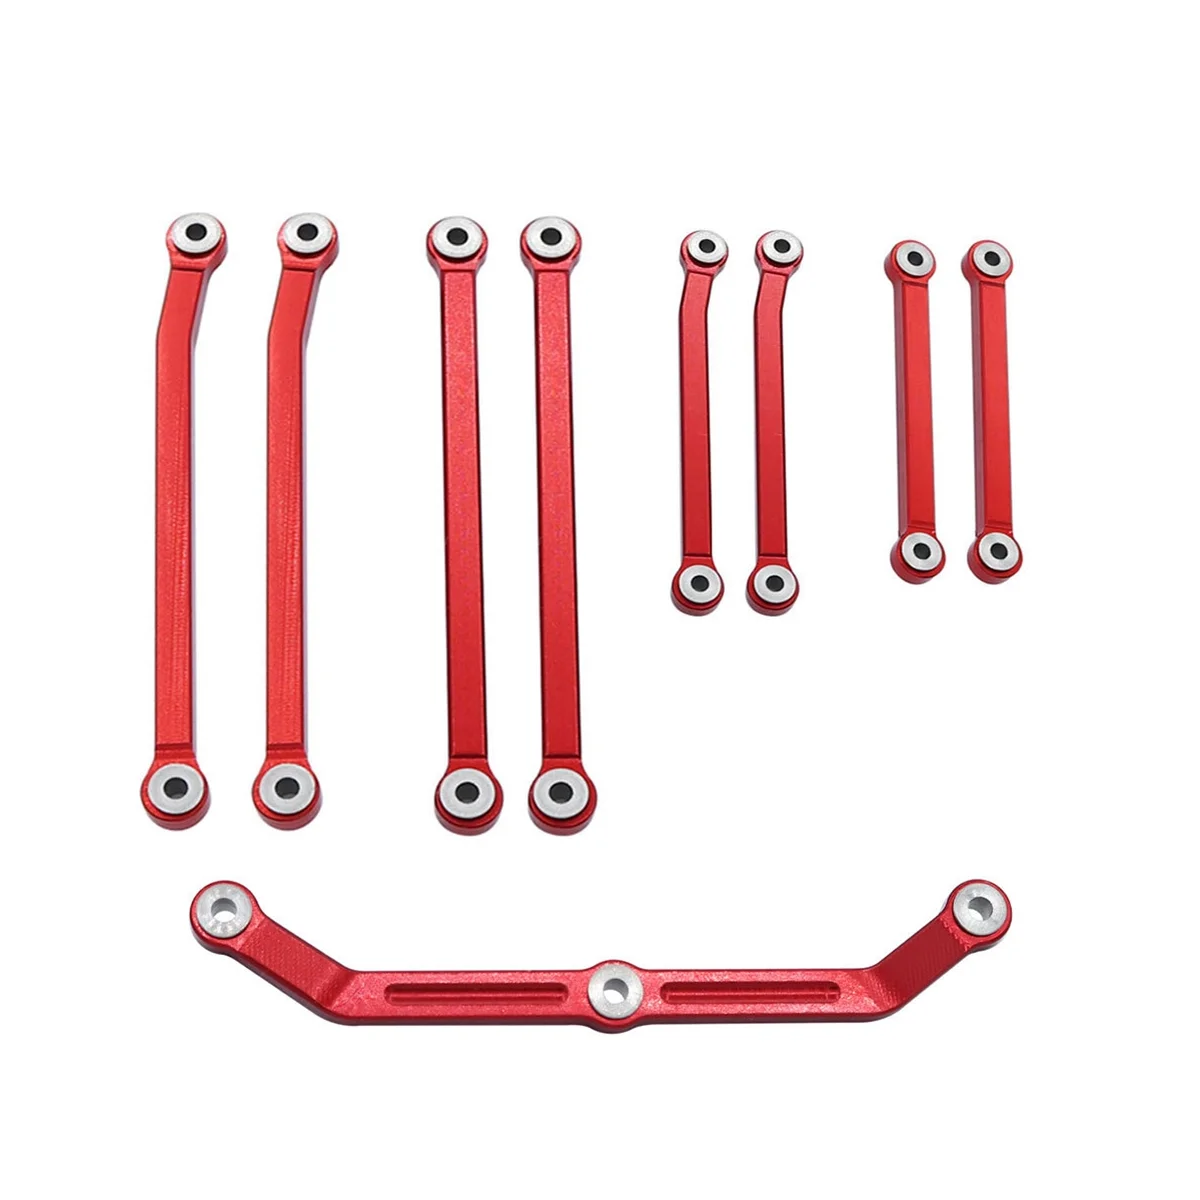 

Metal High Clearance Suspension Link and Steering Link Set 9749 for Traxxas TRX4M 1/18 RC Crawler Car Upgrades Parts,1